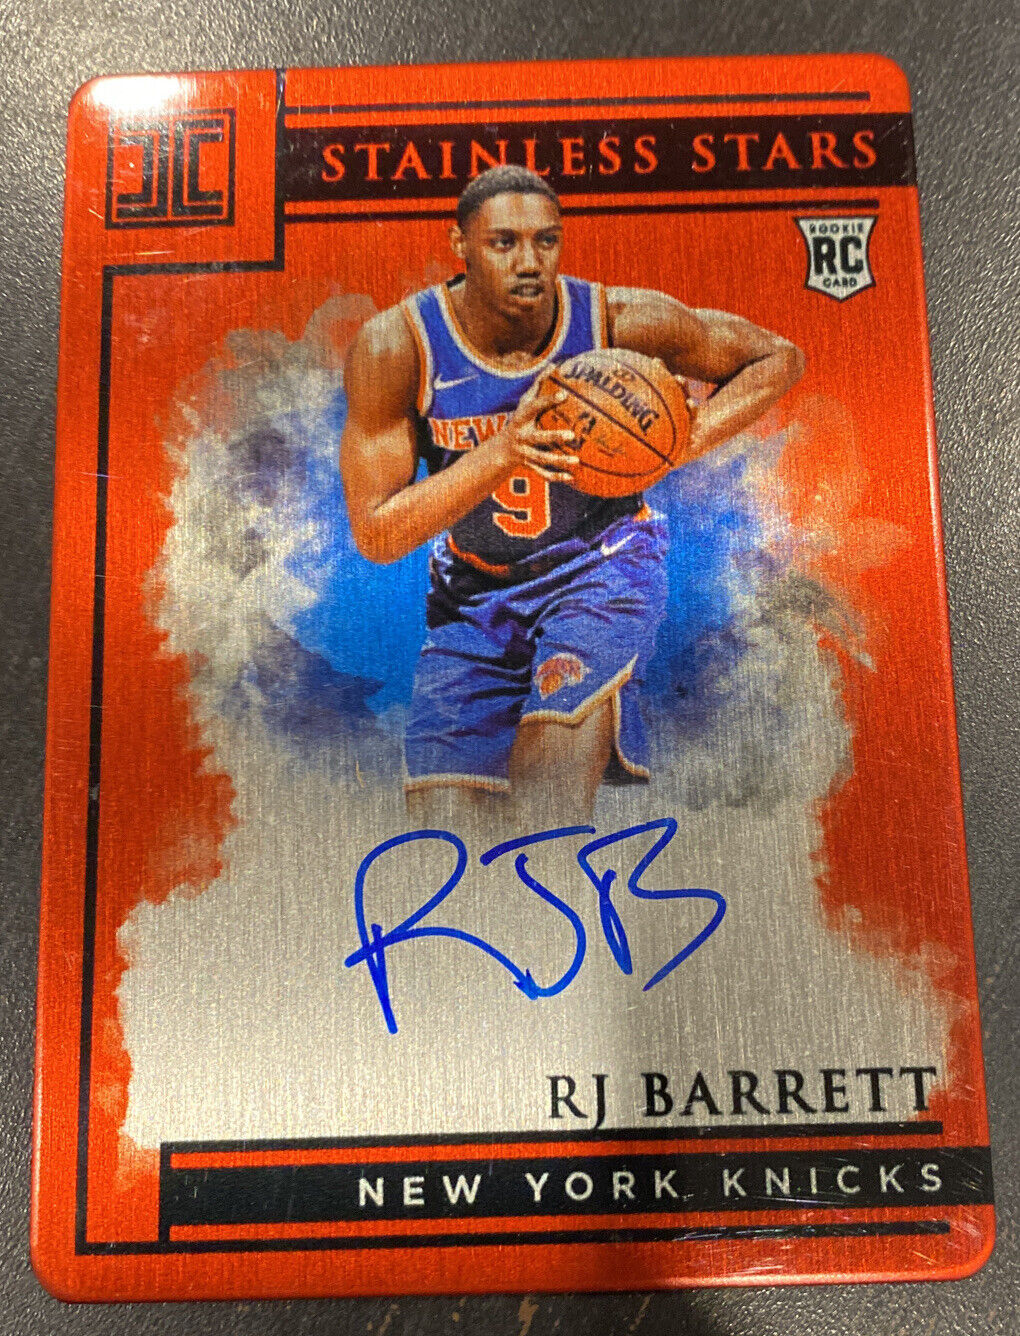 2019 Impeccable Stainless Stars Red #/60 #ST-RJB RJ BARRETT Rookie RC Auto